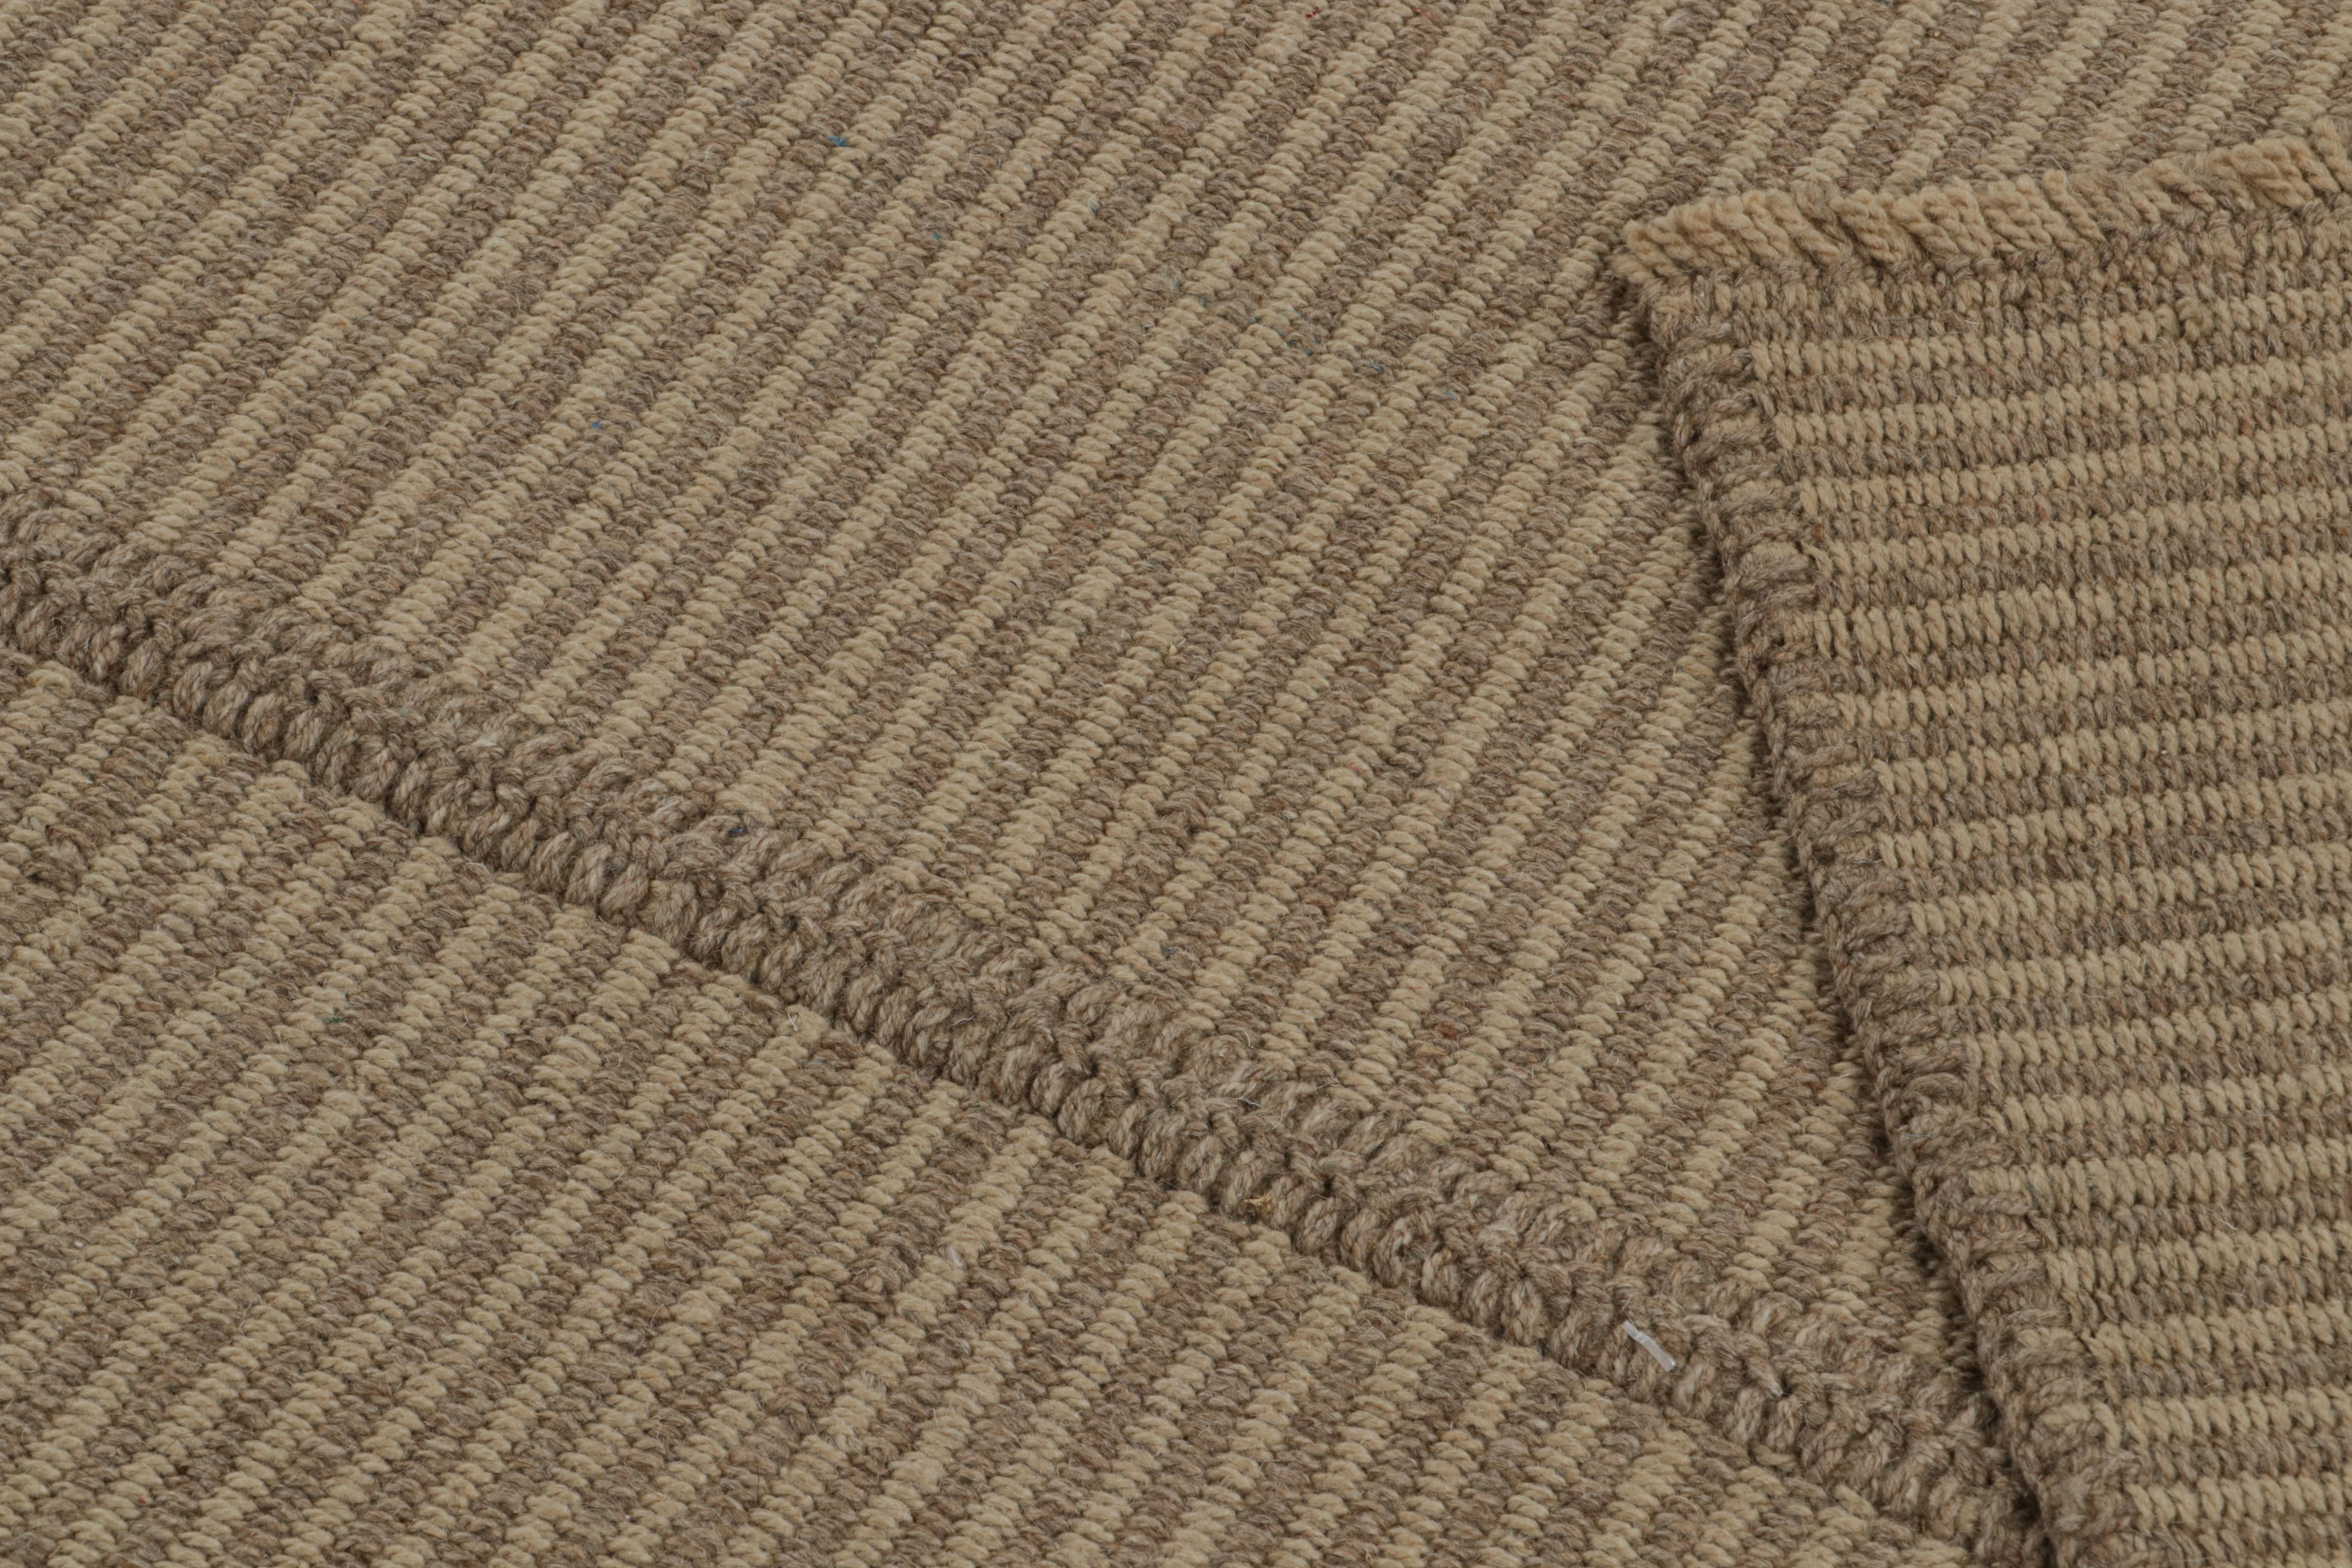 Wool Rug & Kilim’s Contemporary Kilim in Brown Accents, with Textural Stripes For Sale